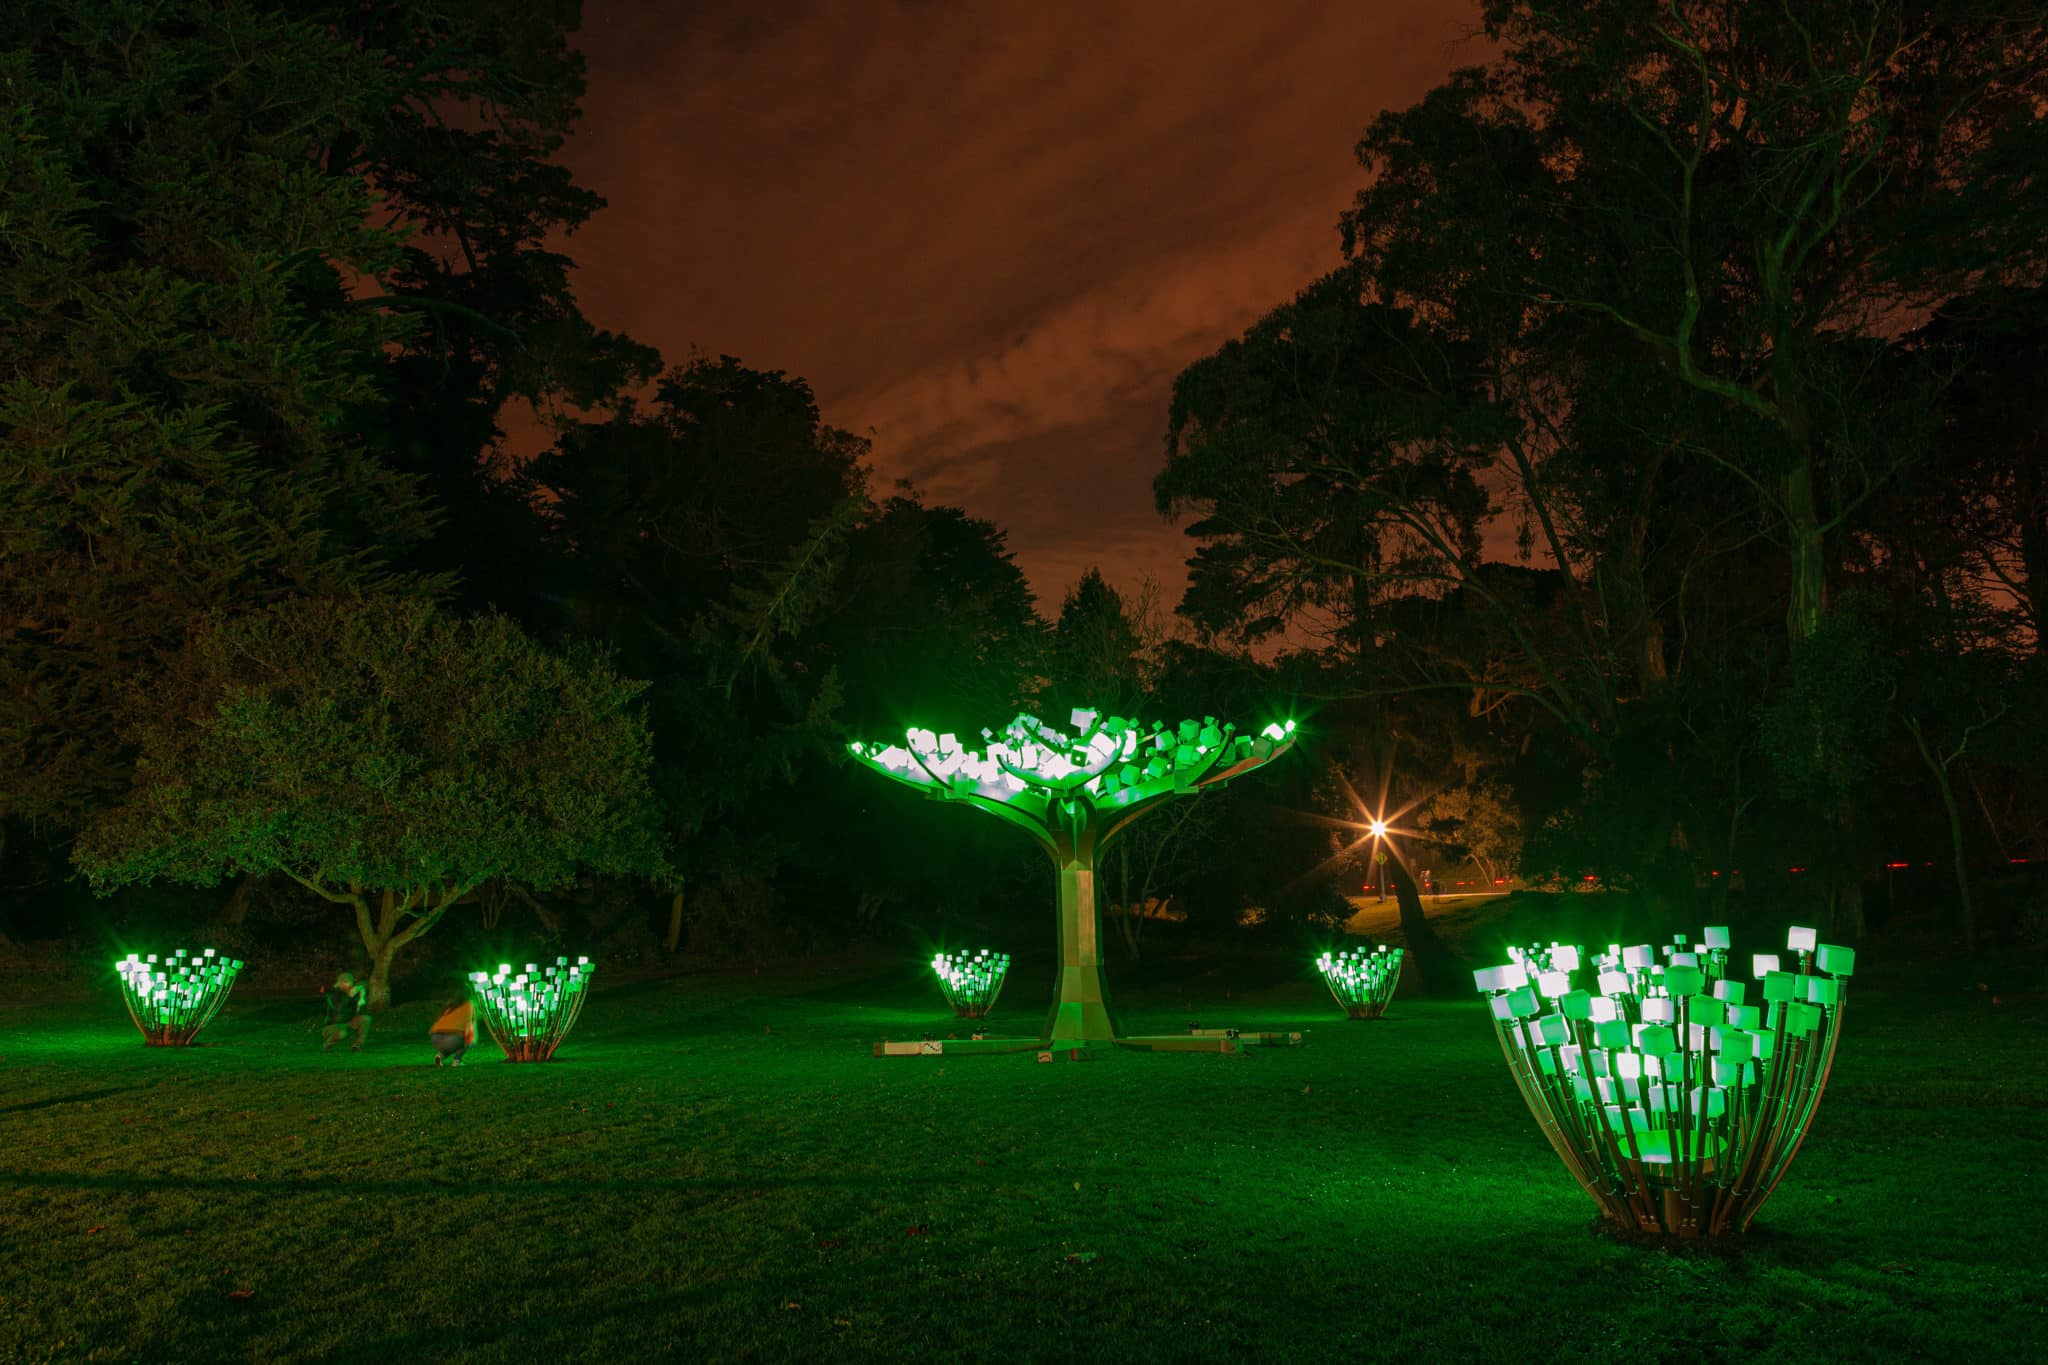 A collection of LED light sculptures in the shape of trees and bushes, lit up in green.